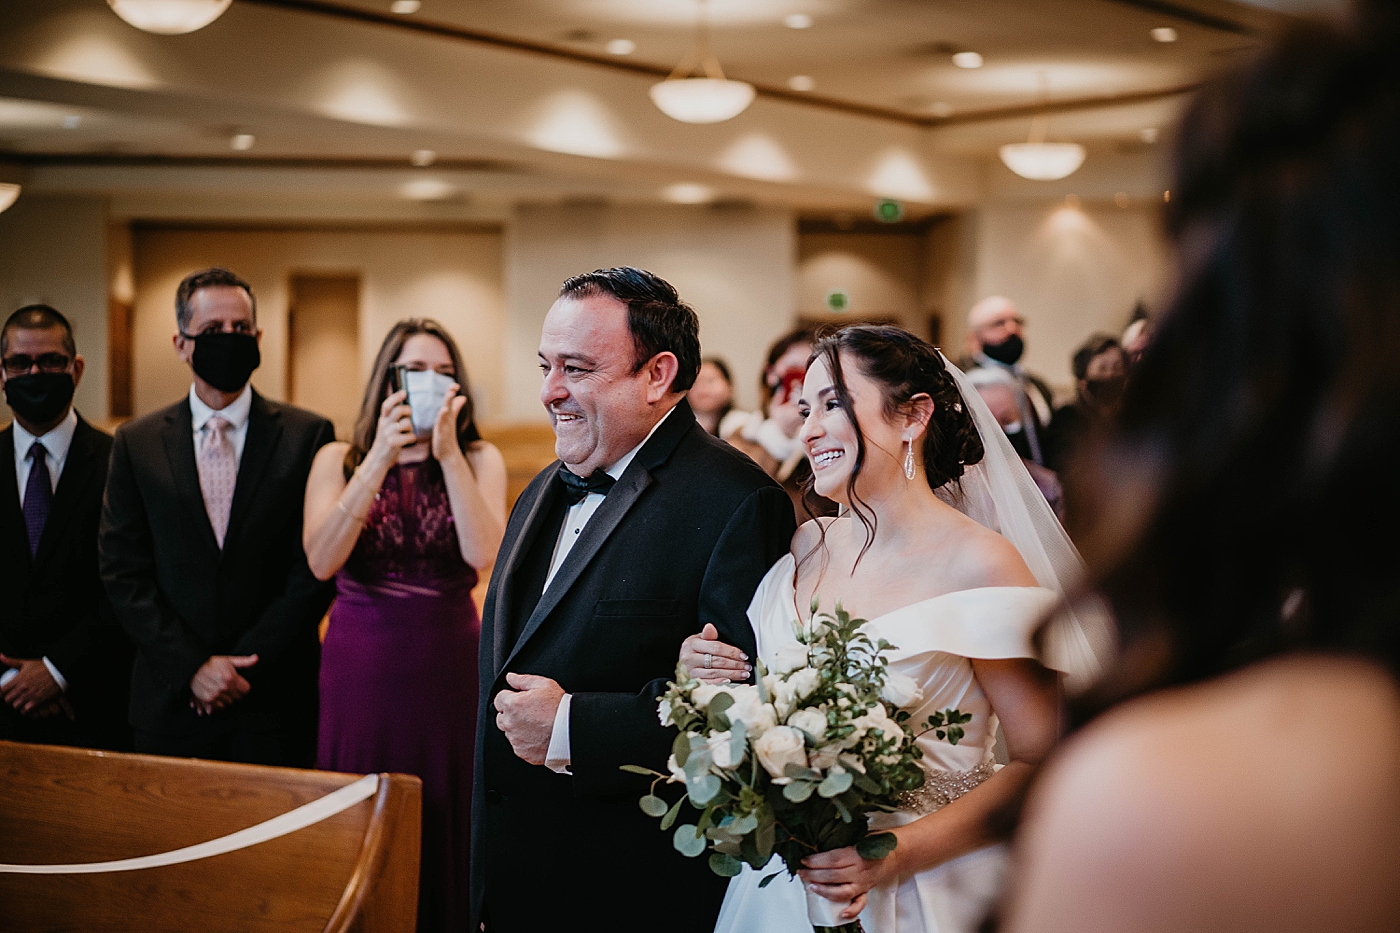 Father and Bride entering Ceremony audience standing Lavan Venue Wedding Photography captured by South Florida Wedding Photographer Krystal Capone Photography